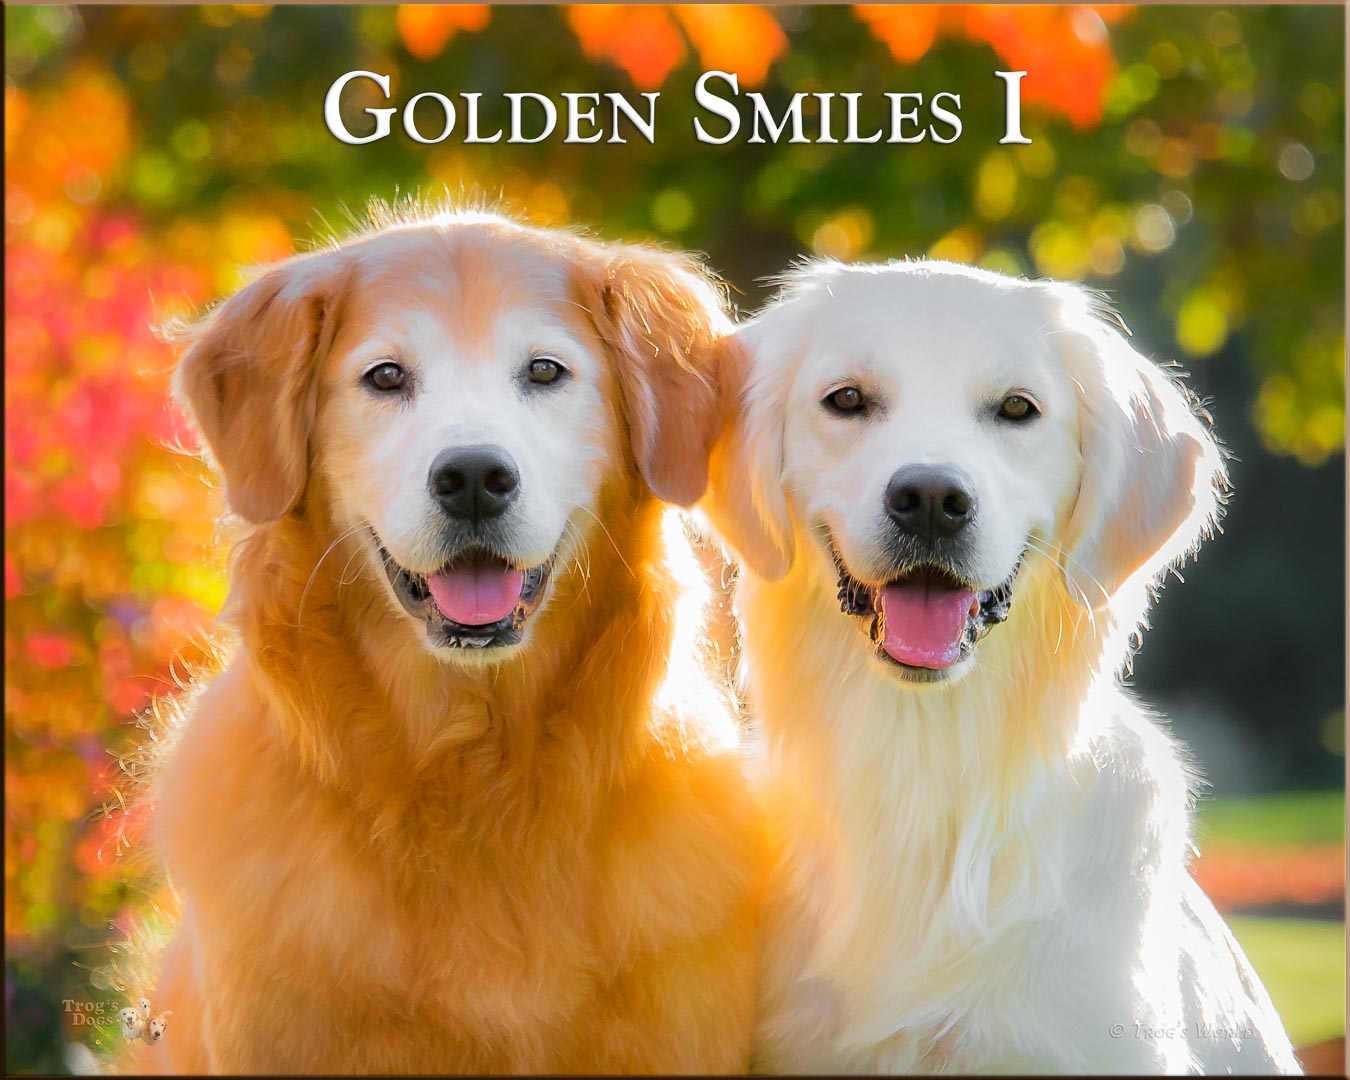 Two Golden Retrievers smiling on an autumn day